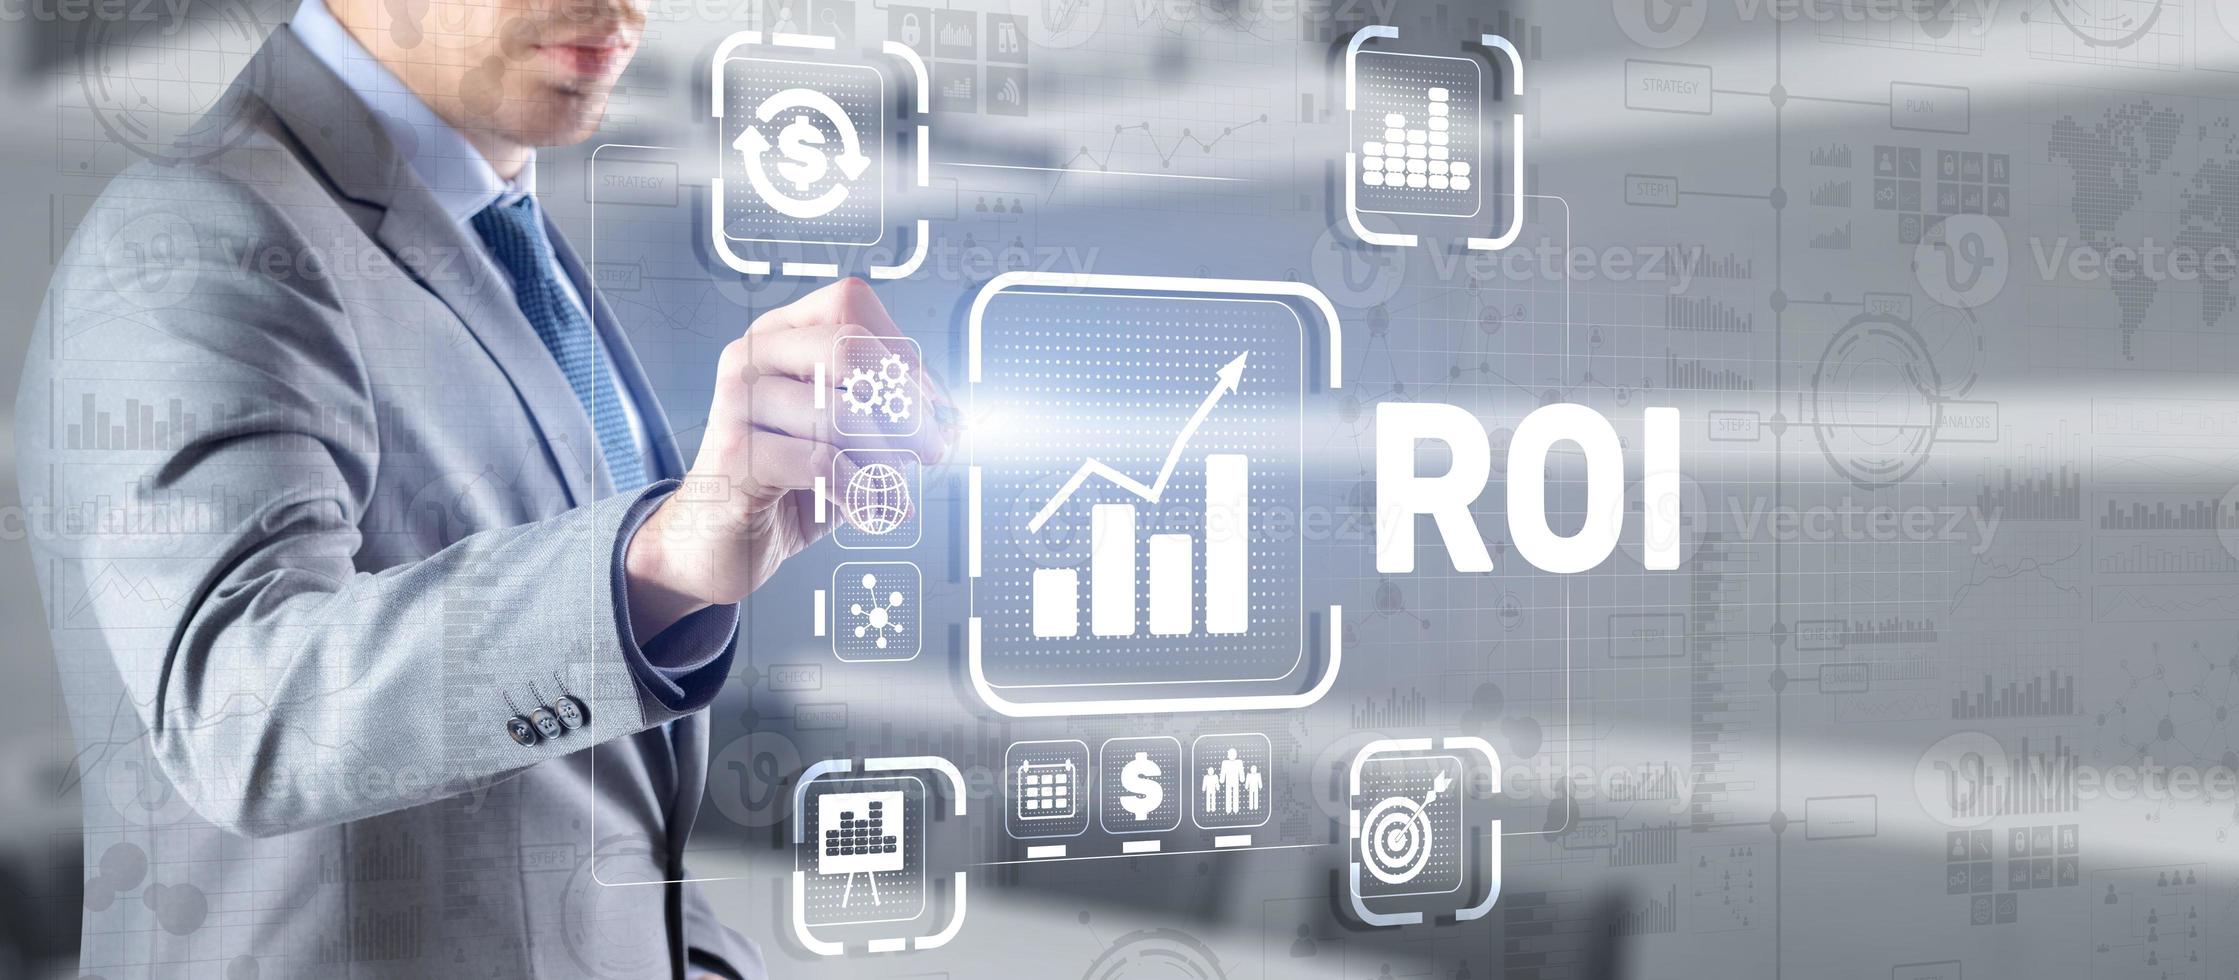 Roi Return On Investment Business Technology Analysis Finance Concept photo